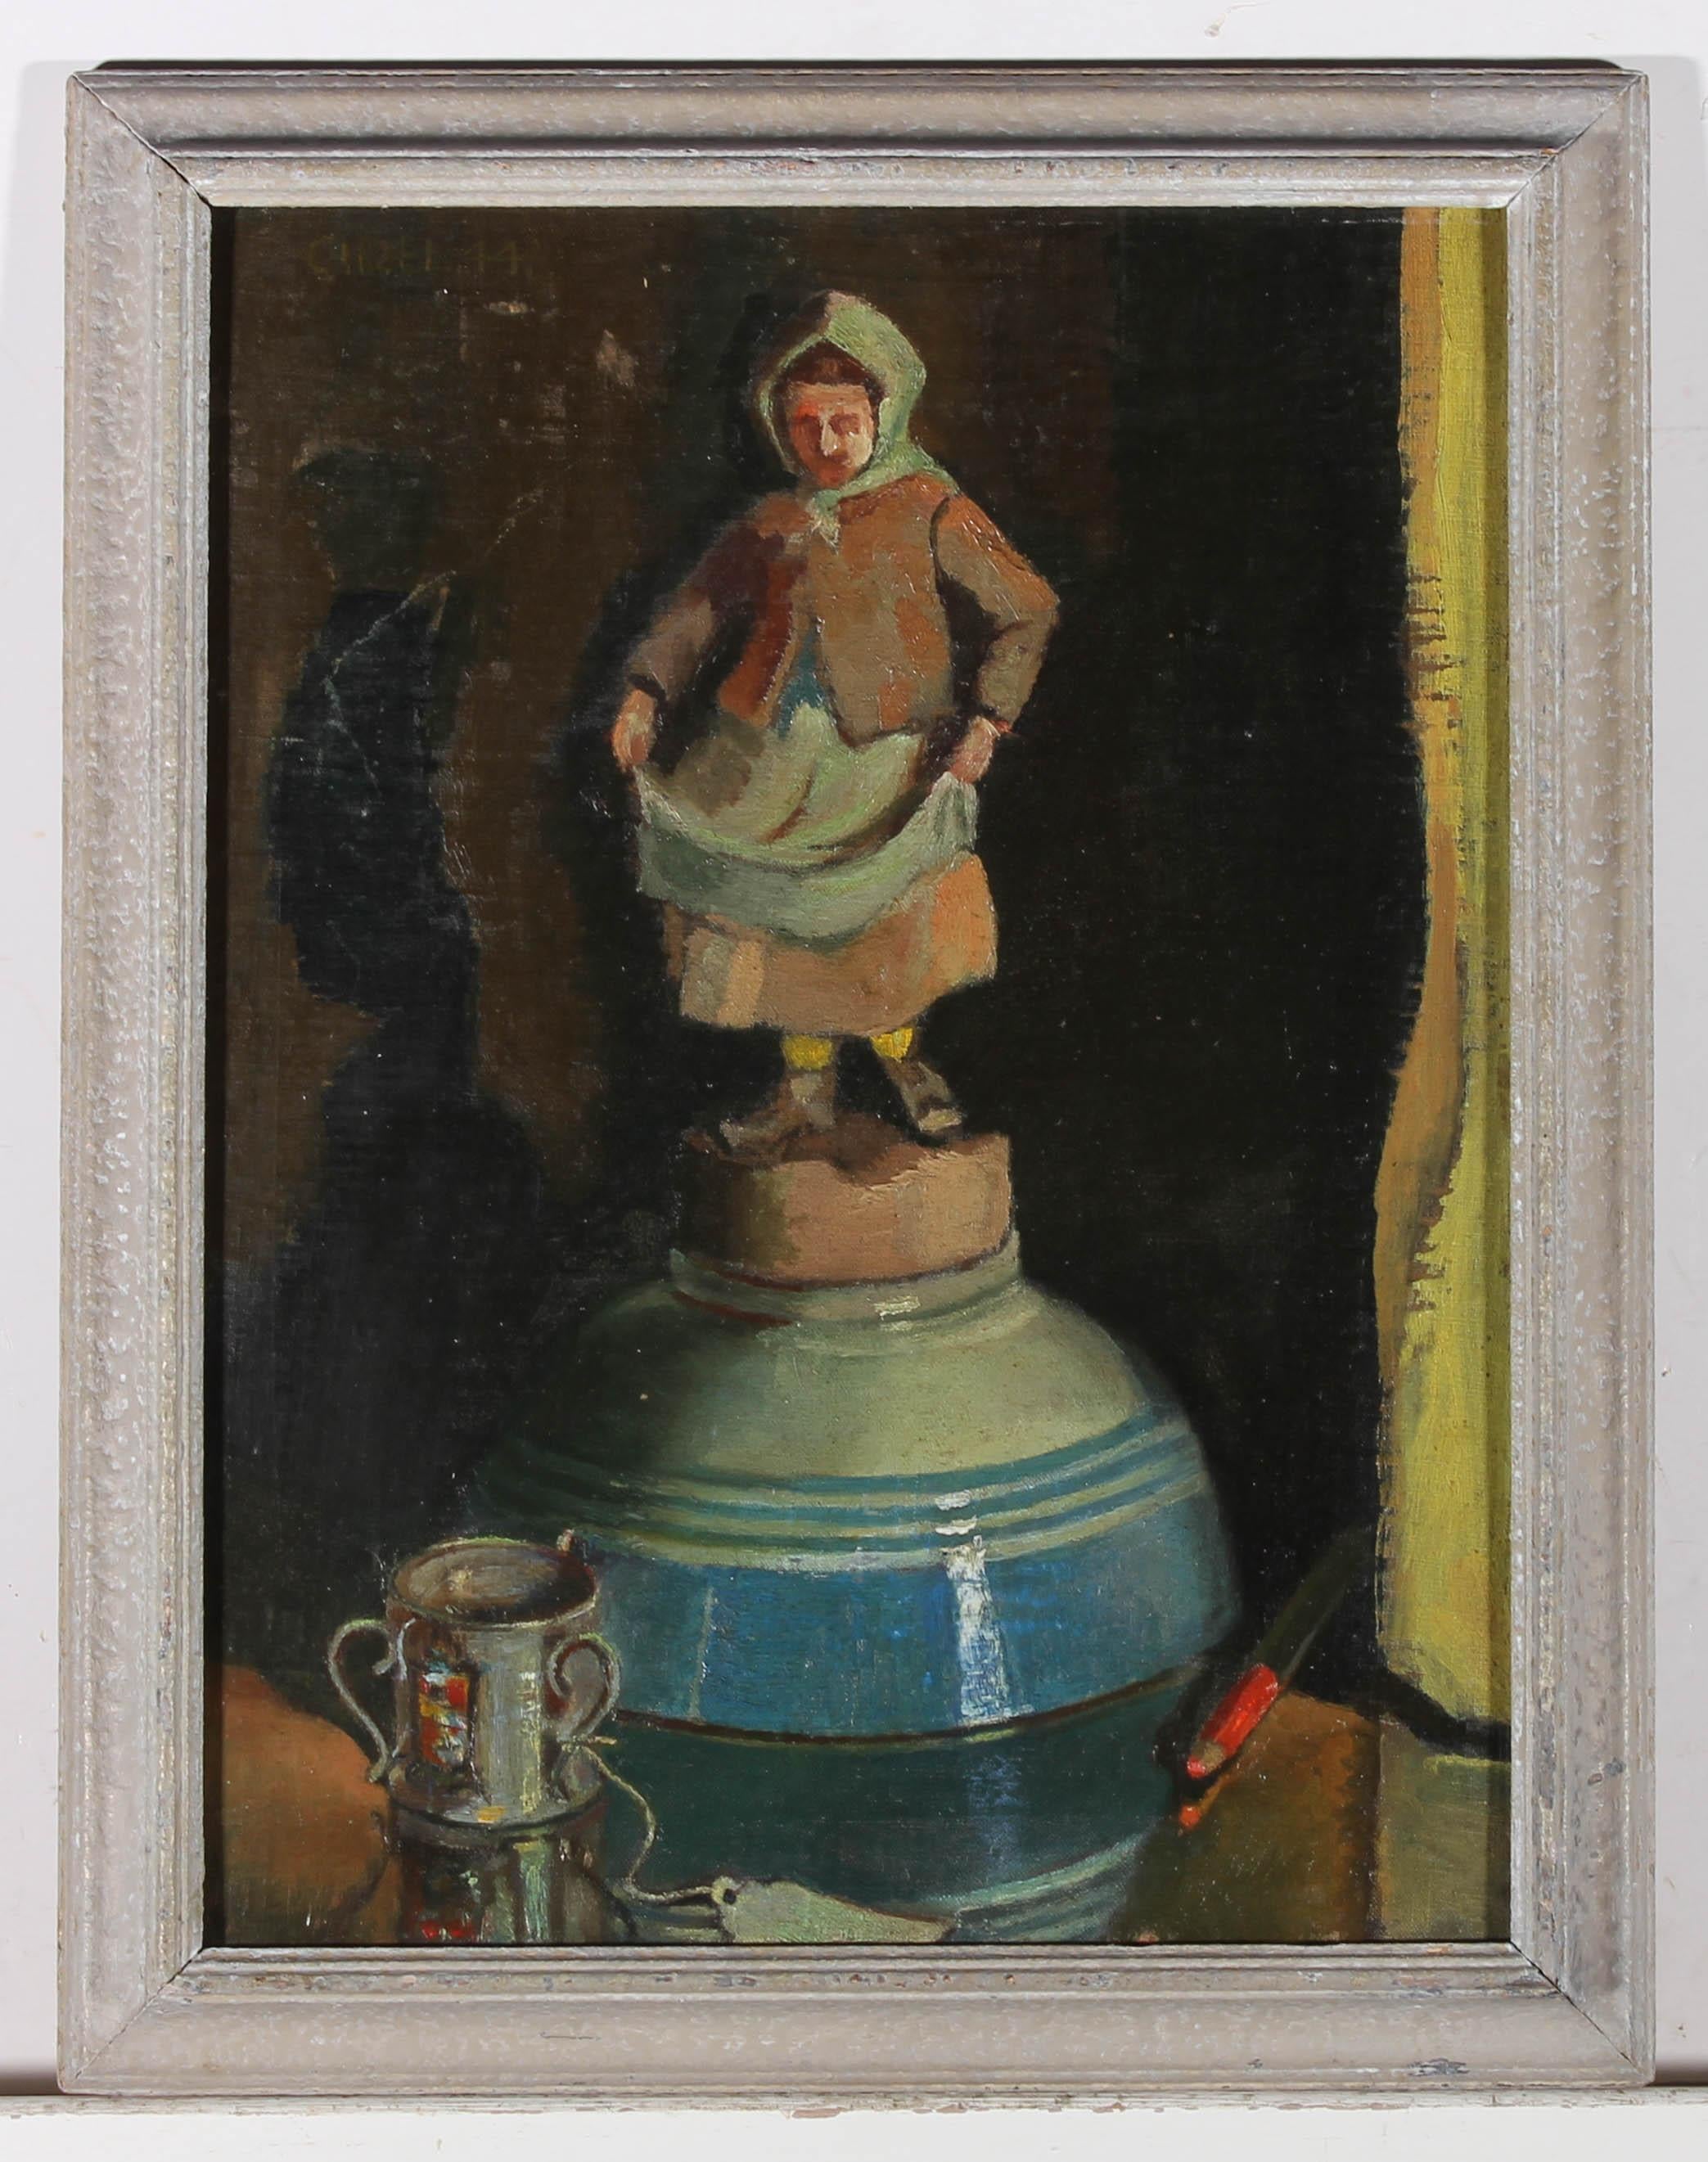 A fine example of Mid Century painting, this still life shows a collection of unusual antiques. There is a little doll standing on top of an upturned bowl with three handled tyg cup in front. A vibrant red pencil adds a splash of colour to the